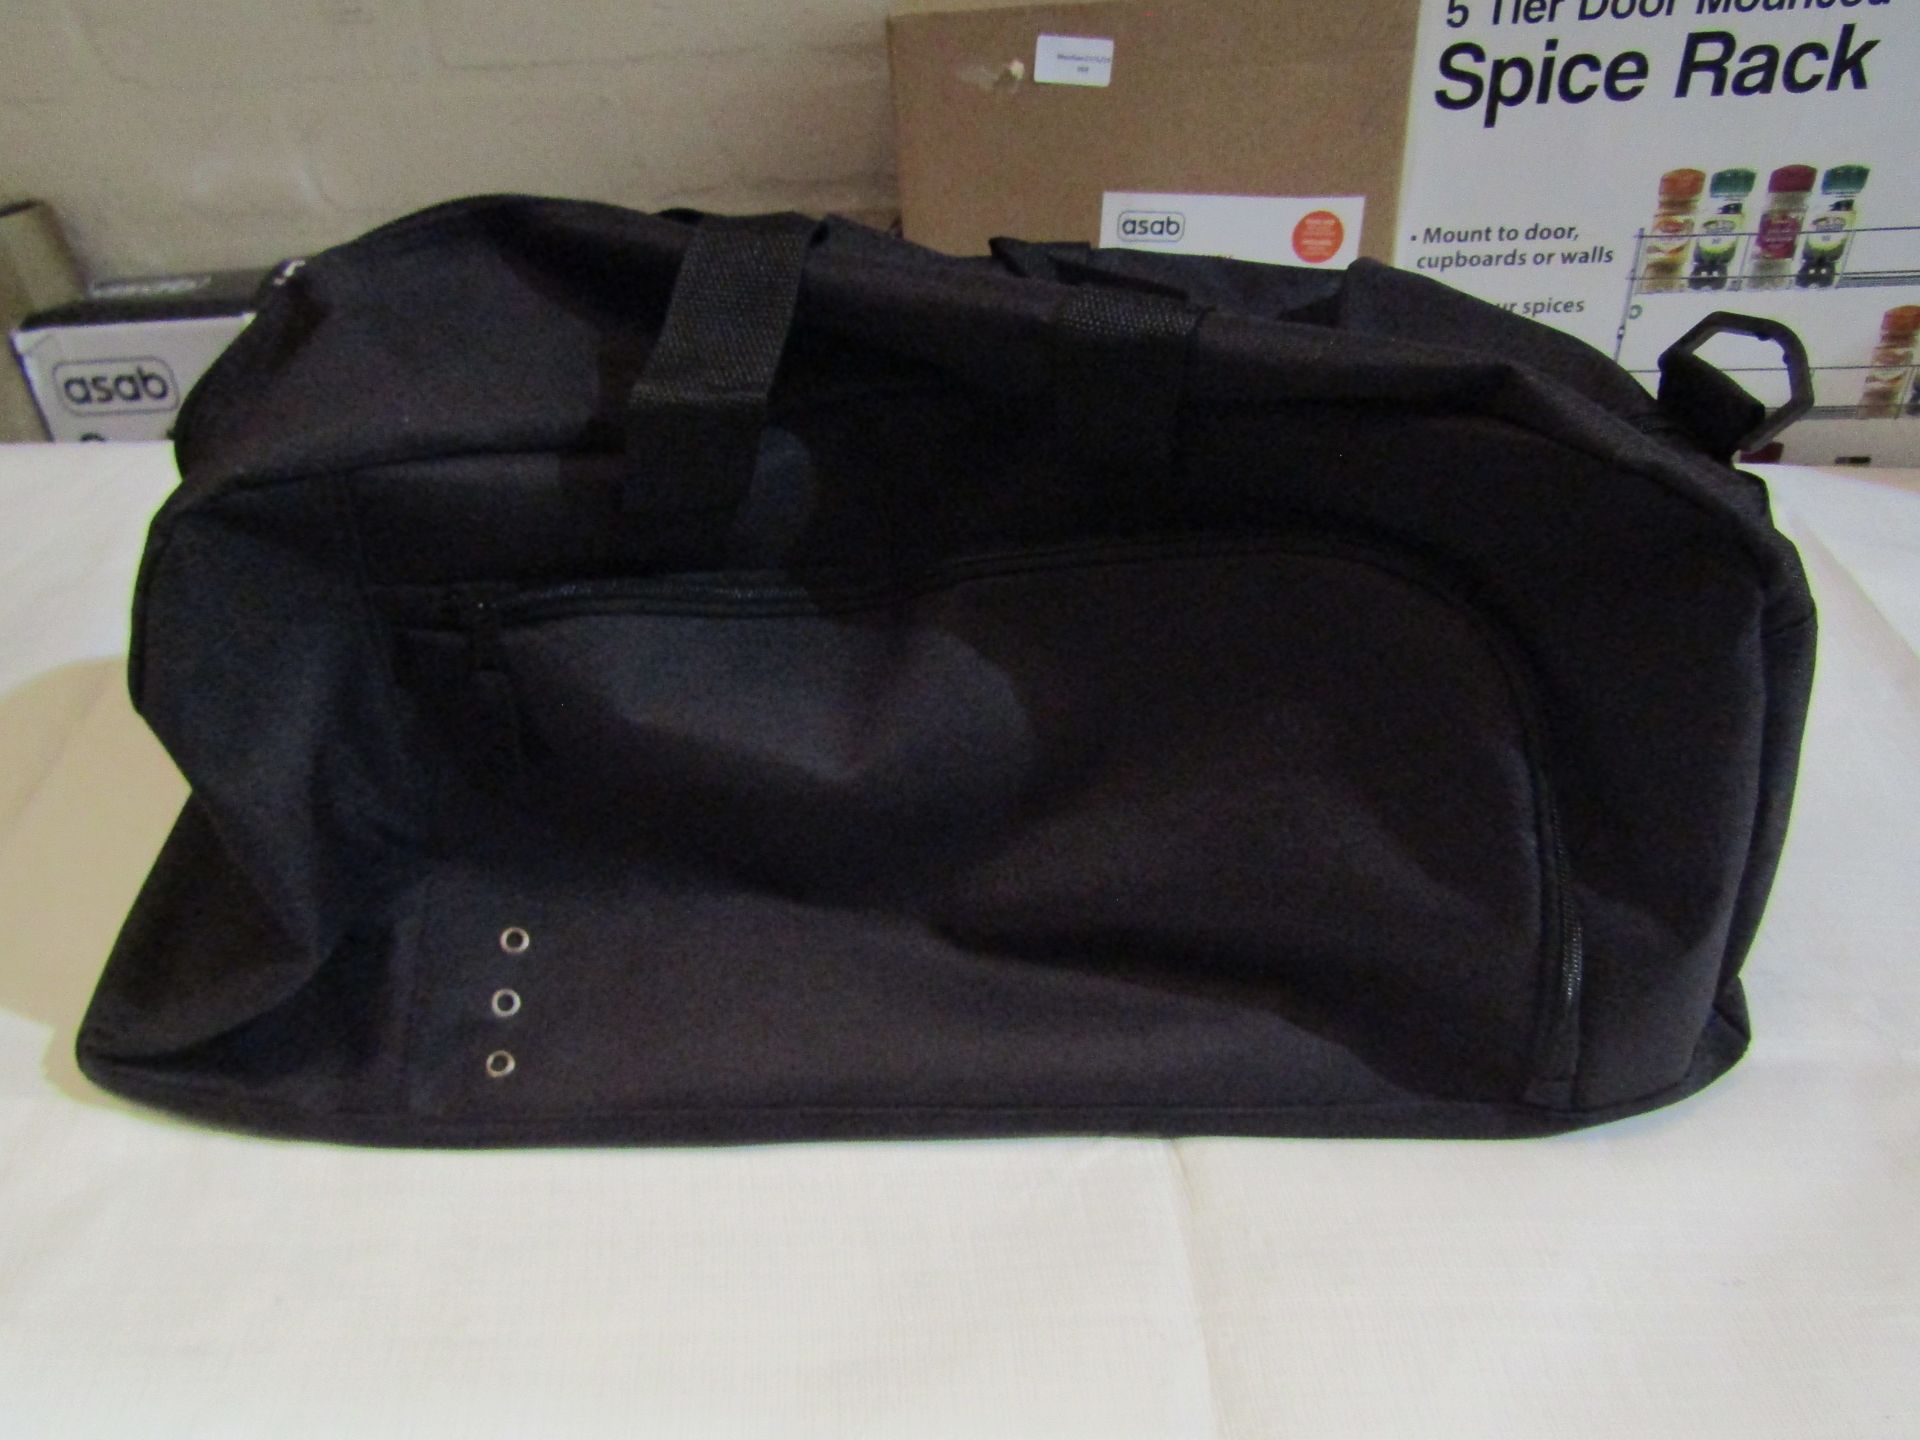 2x High Quailty Black Duffle Bag With Small & Carry Handle/Shoulder Strap - New & Packaged.